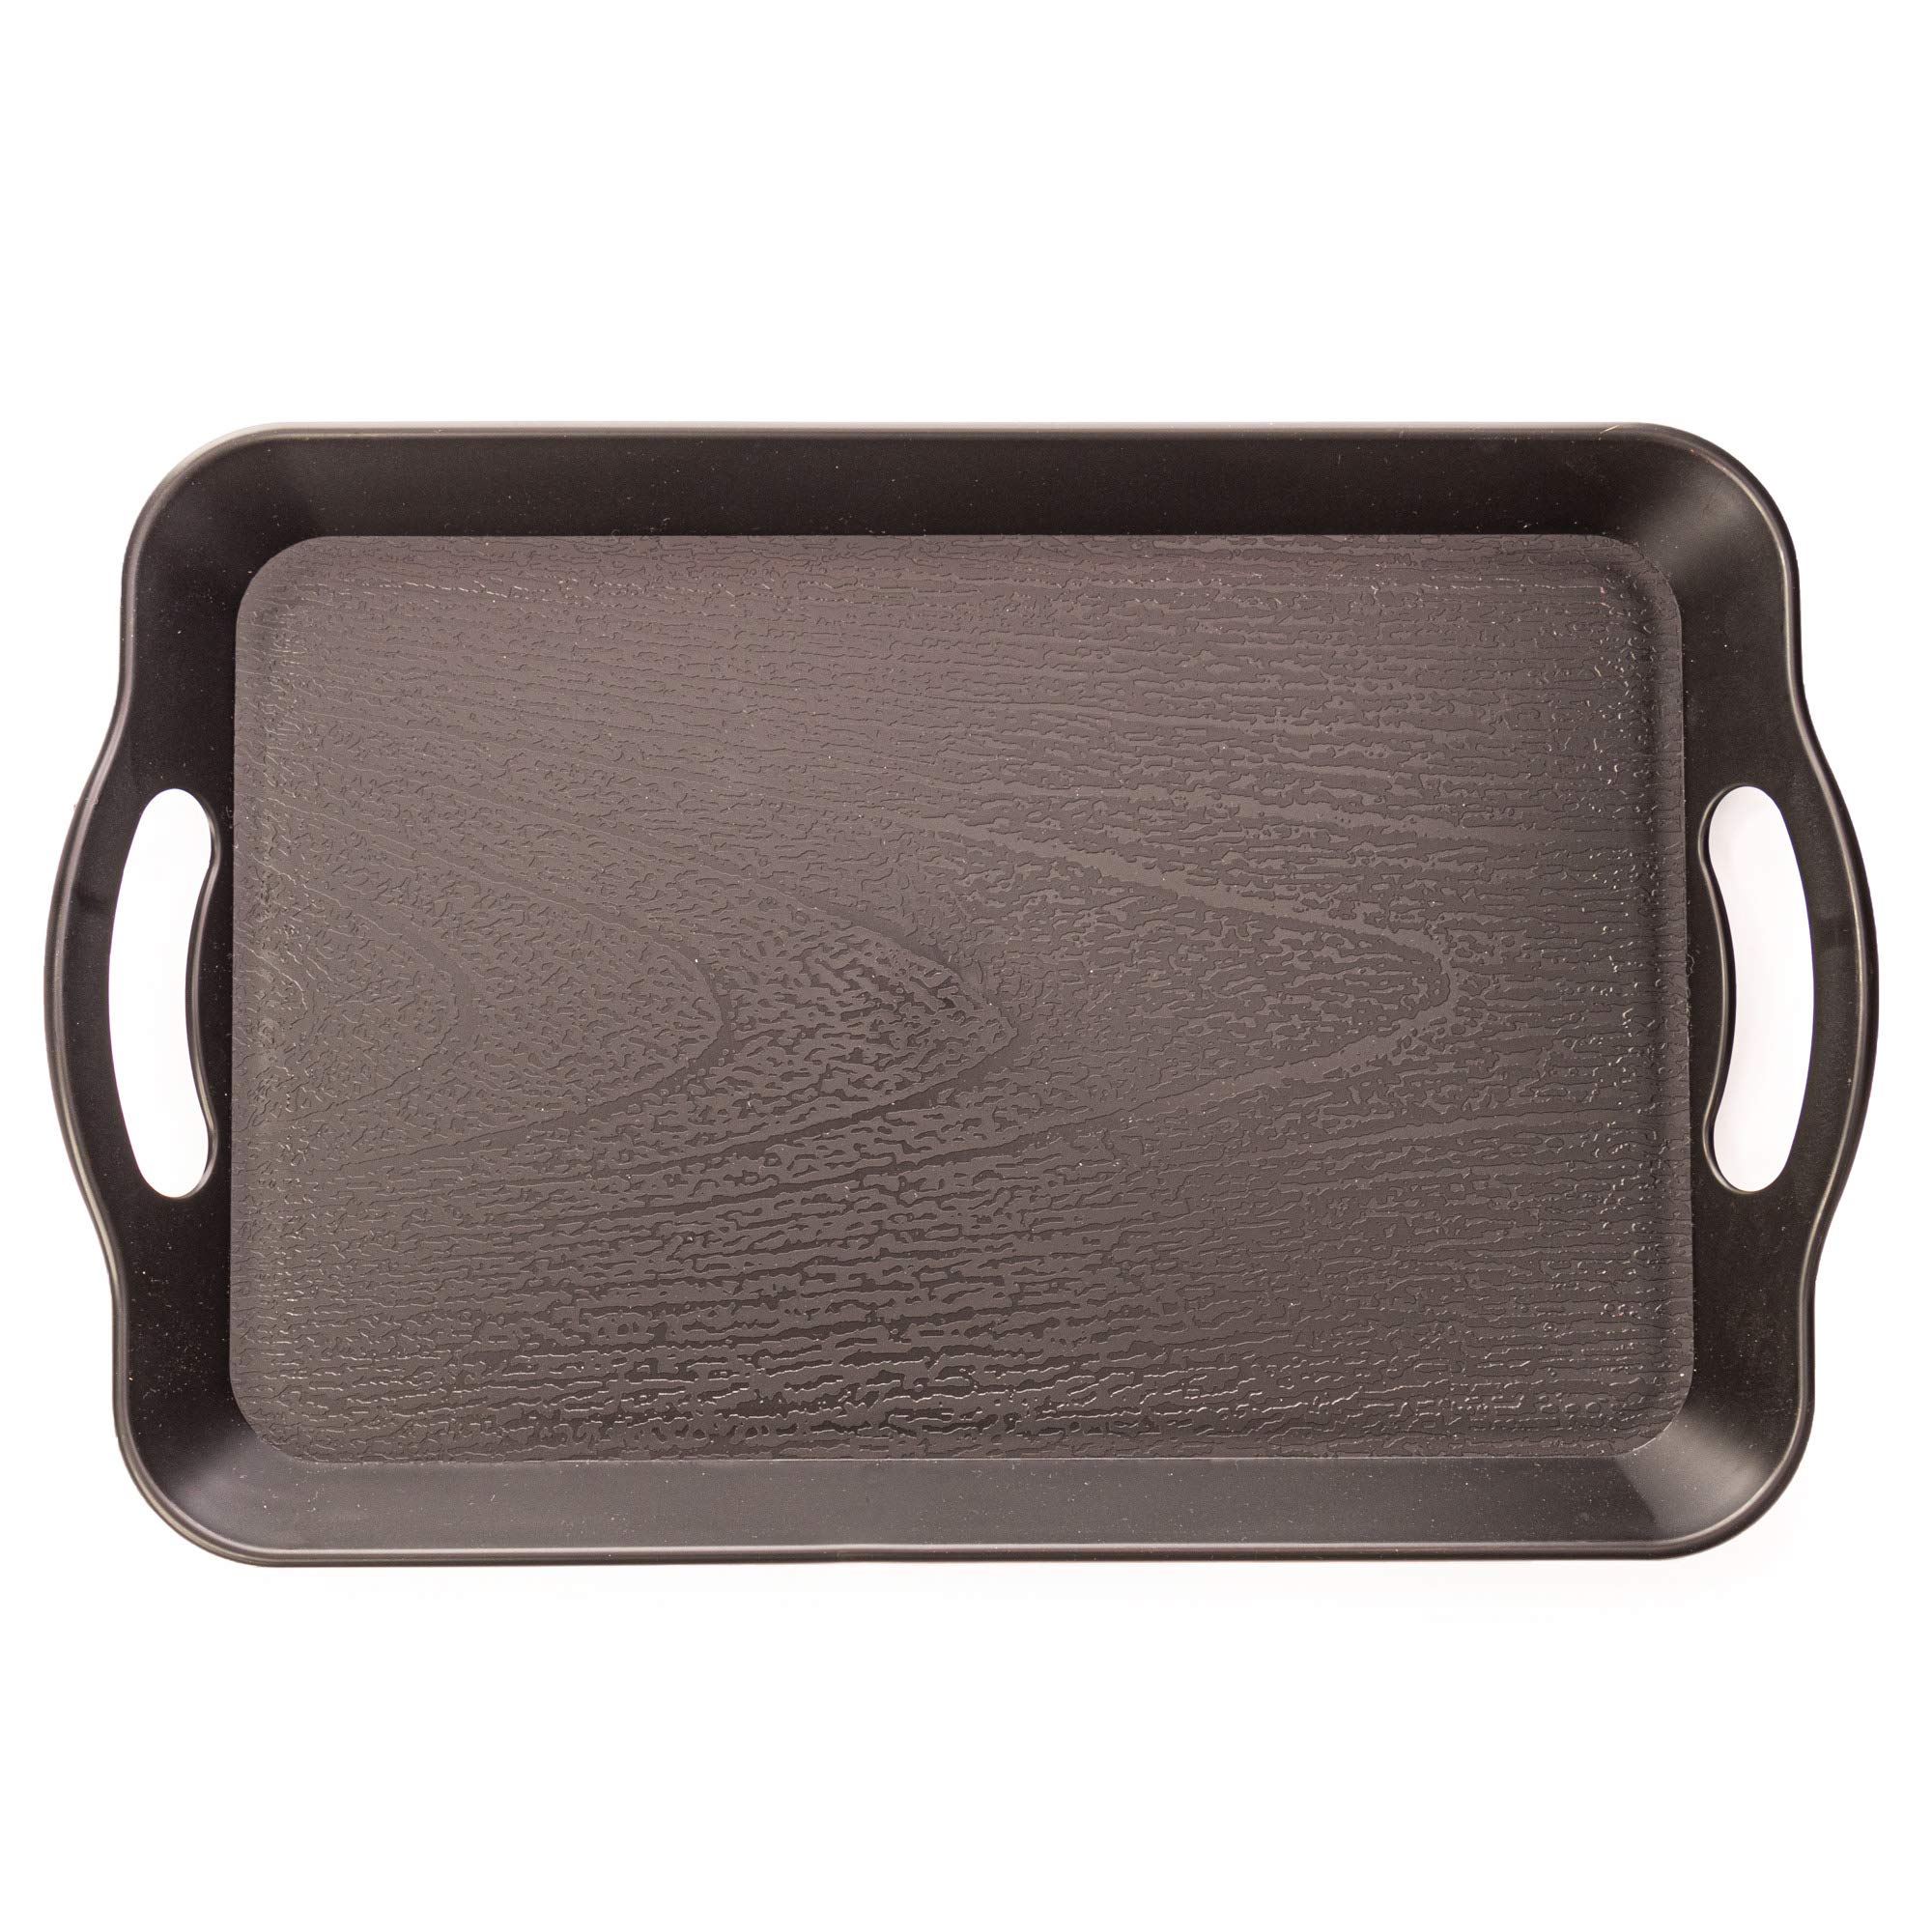 Handled Cafeteria Tray - 14" x 9" Rectangular Wood Grain Textured Plastic Food Serving TV Tray - Great for Restaurant Buffets, Diners, School Lunch, Cafe Commercial Kitchen and More (Black)